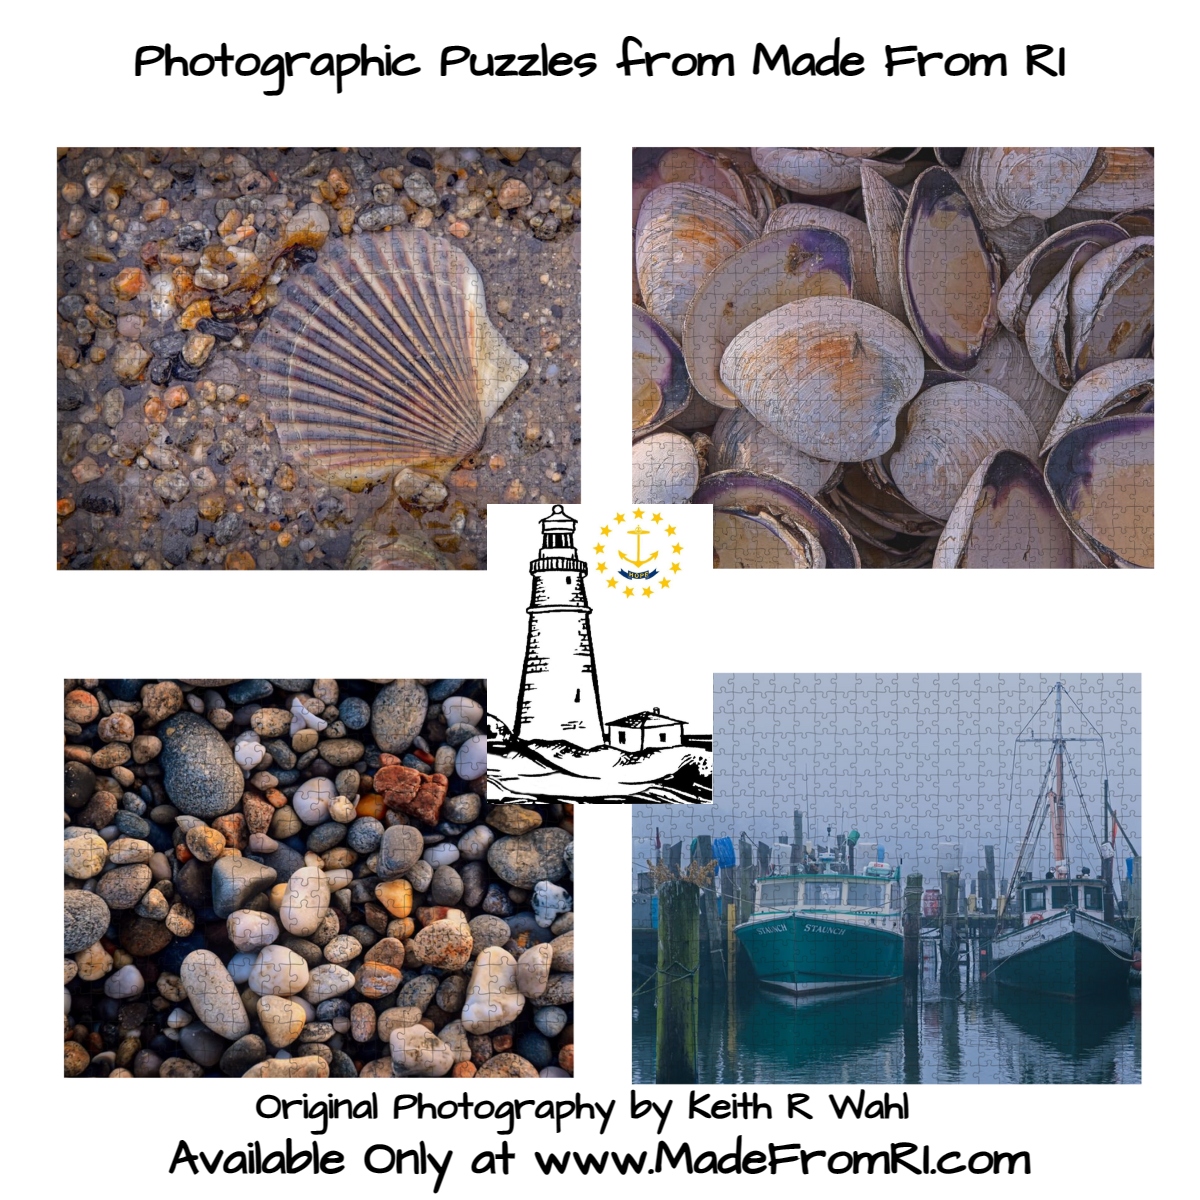 Made From RI Photo Puzzles